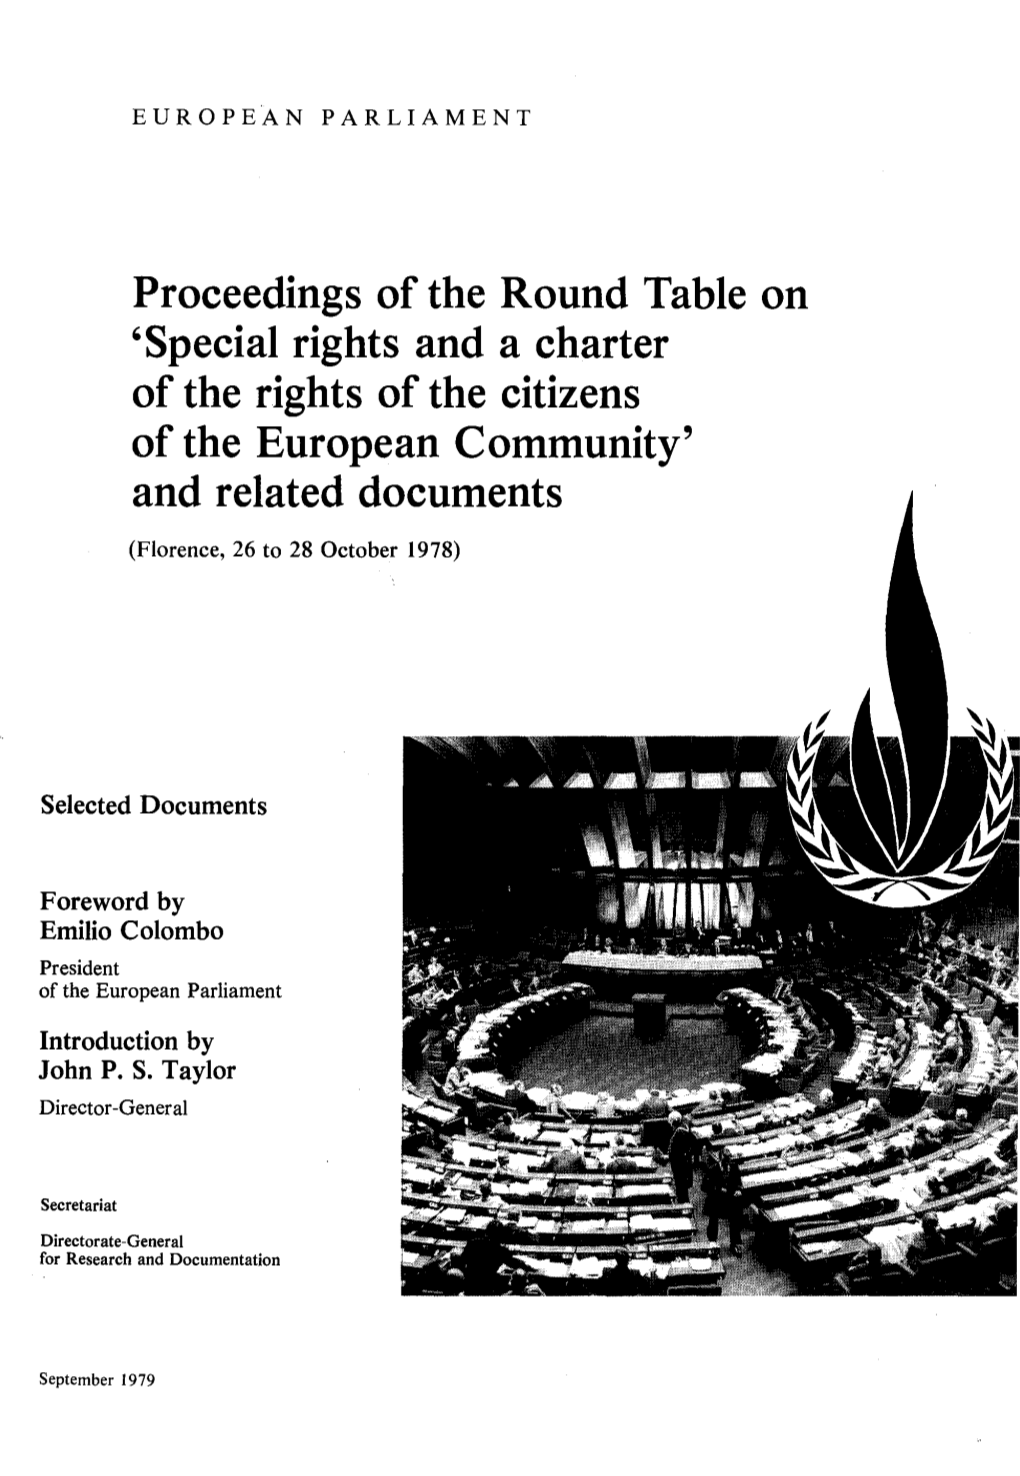 'Special Rights and a Charter of the Rights of the Citizens of the European Community' and Related Documents